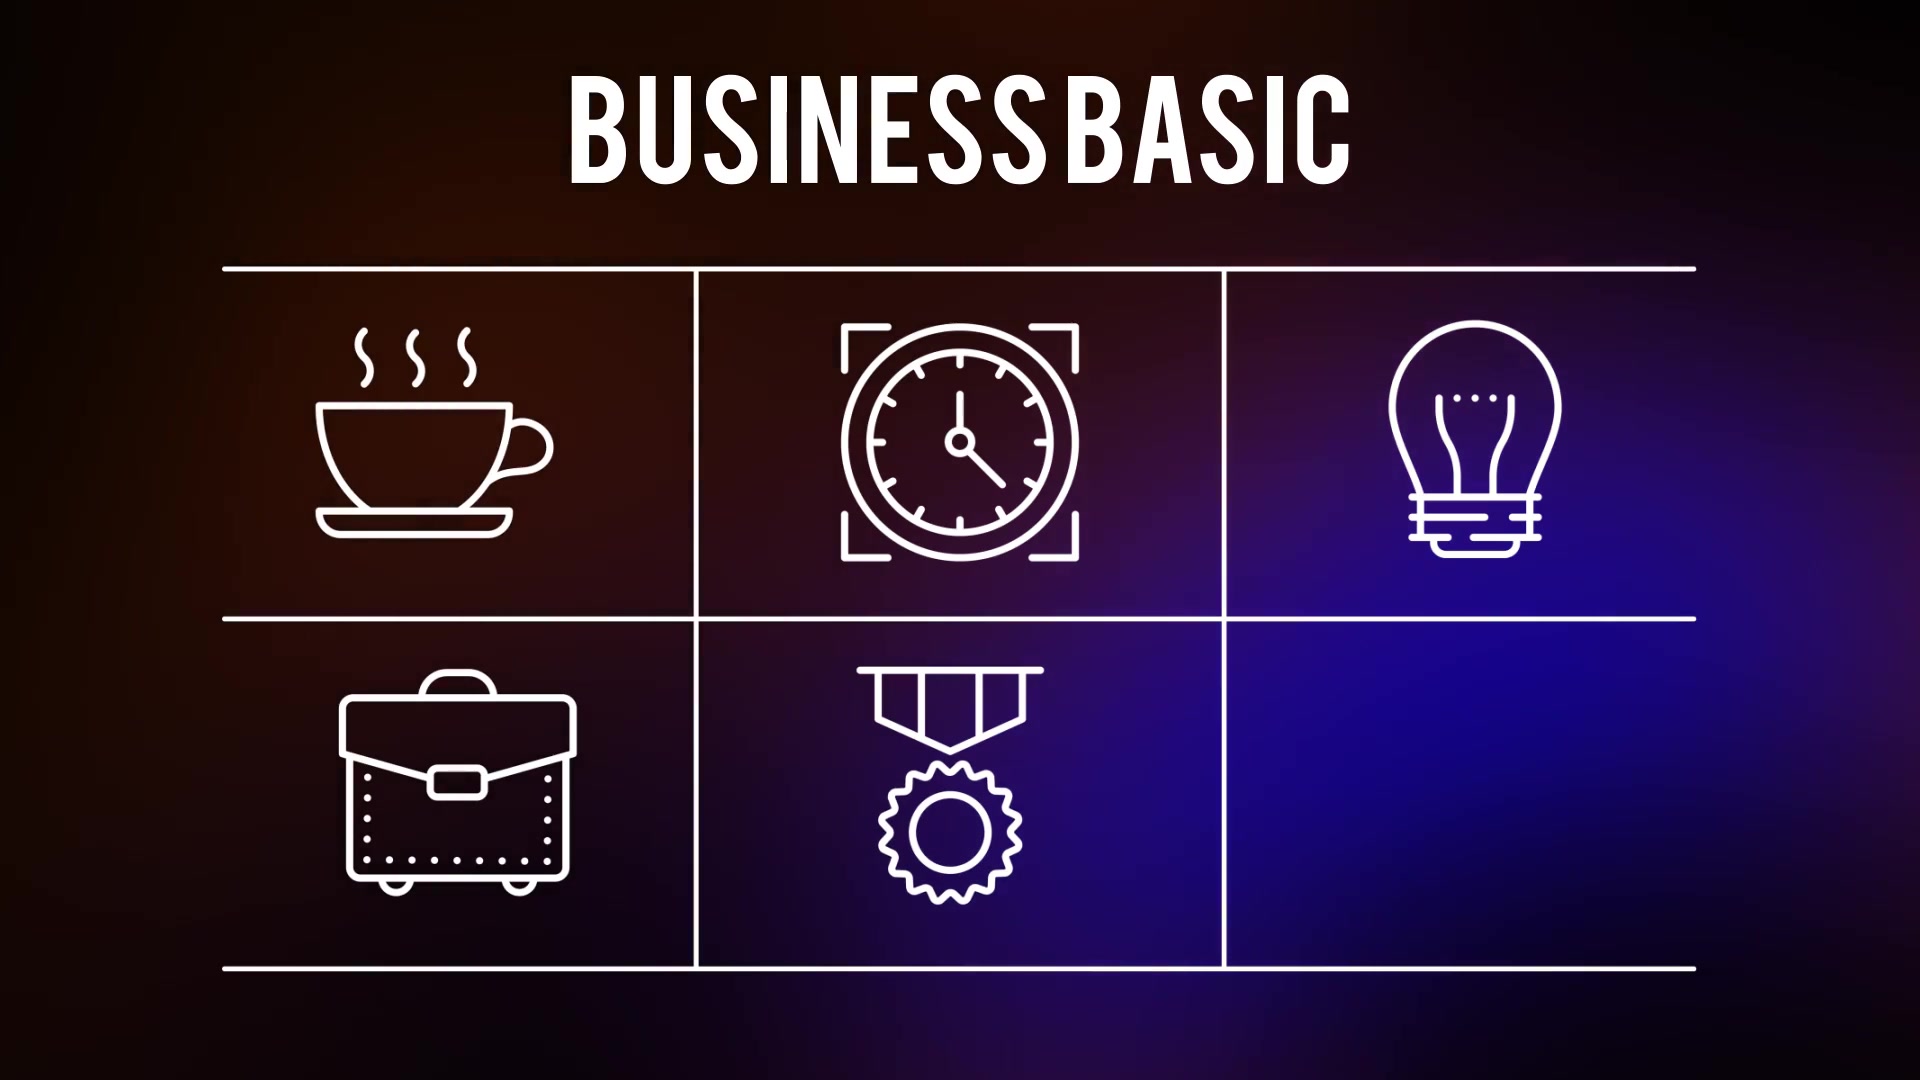 Business Basic 25 Outline Animated Icons - Download Videohive 23151188